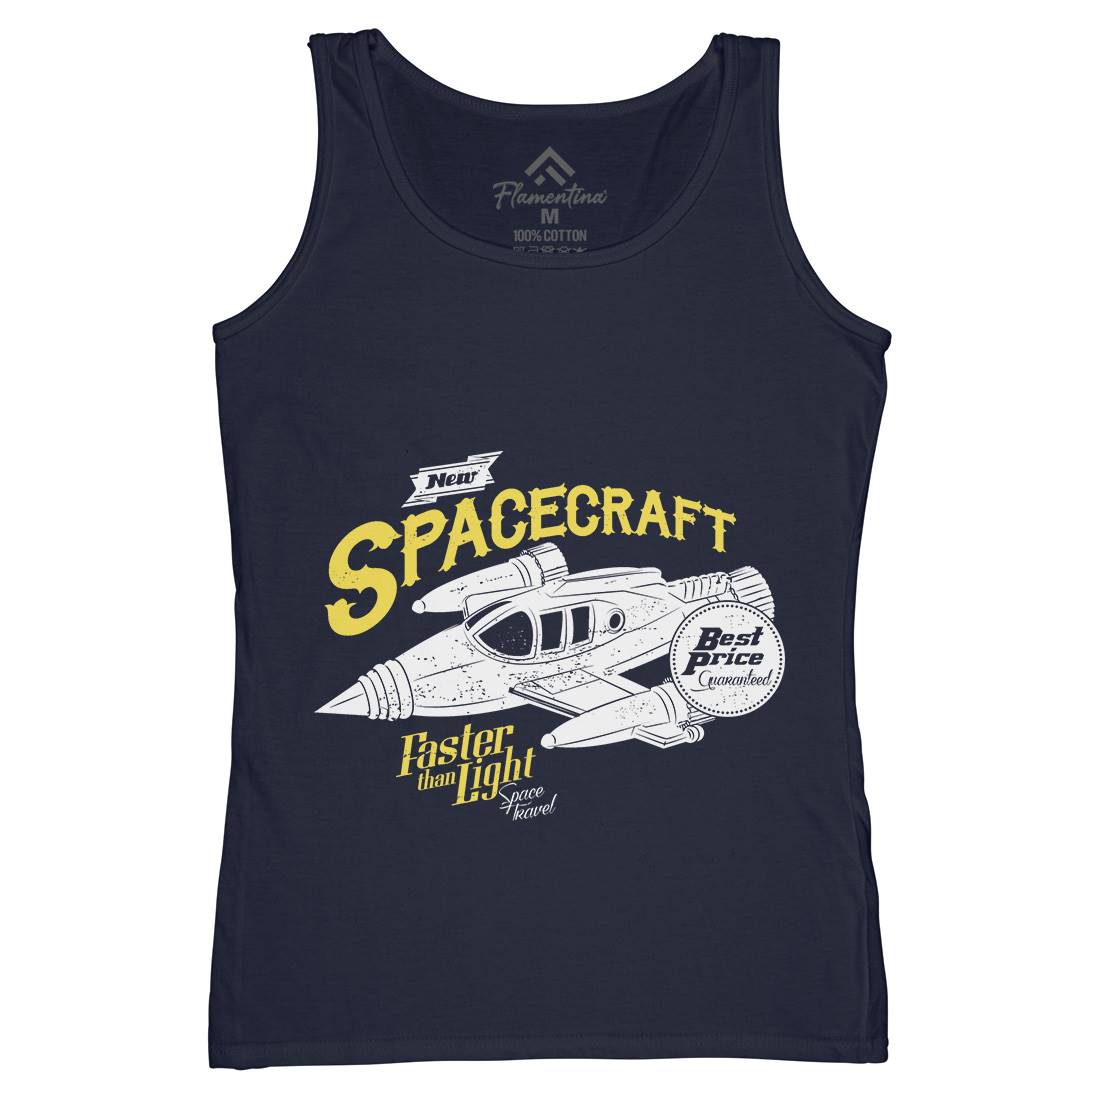 Spacecraft Womens Organic Tank Top Vest Space A958